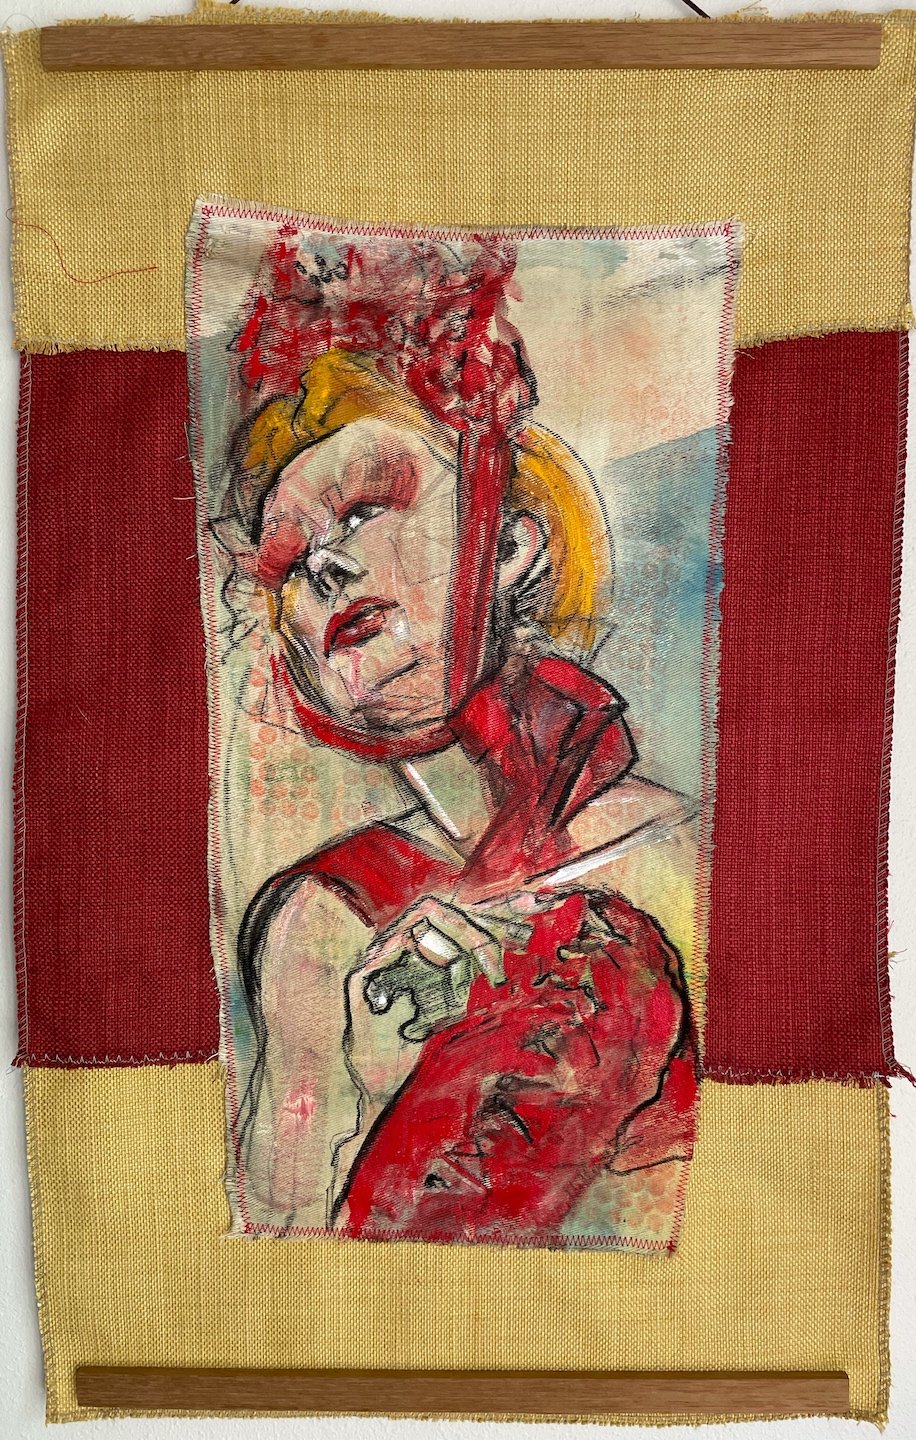    Dominant Red  , 23” x 17”, acrylic and charcoal on monoprint canvas sewn onto reclaimed fabric 